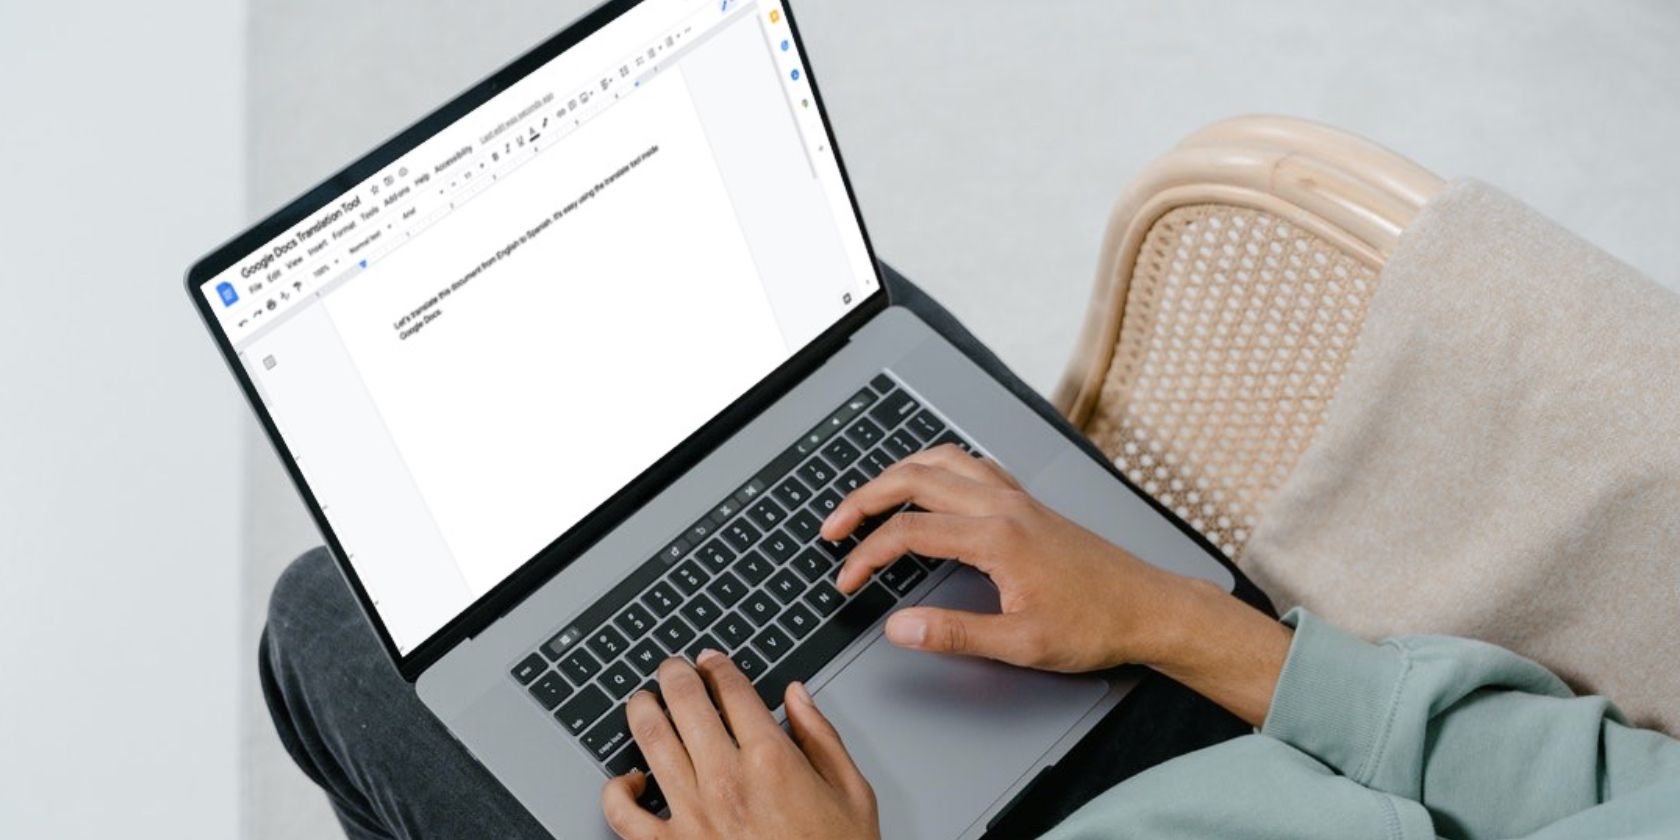 Image shows a man using a laptop to type in Google Docs